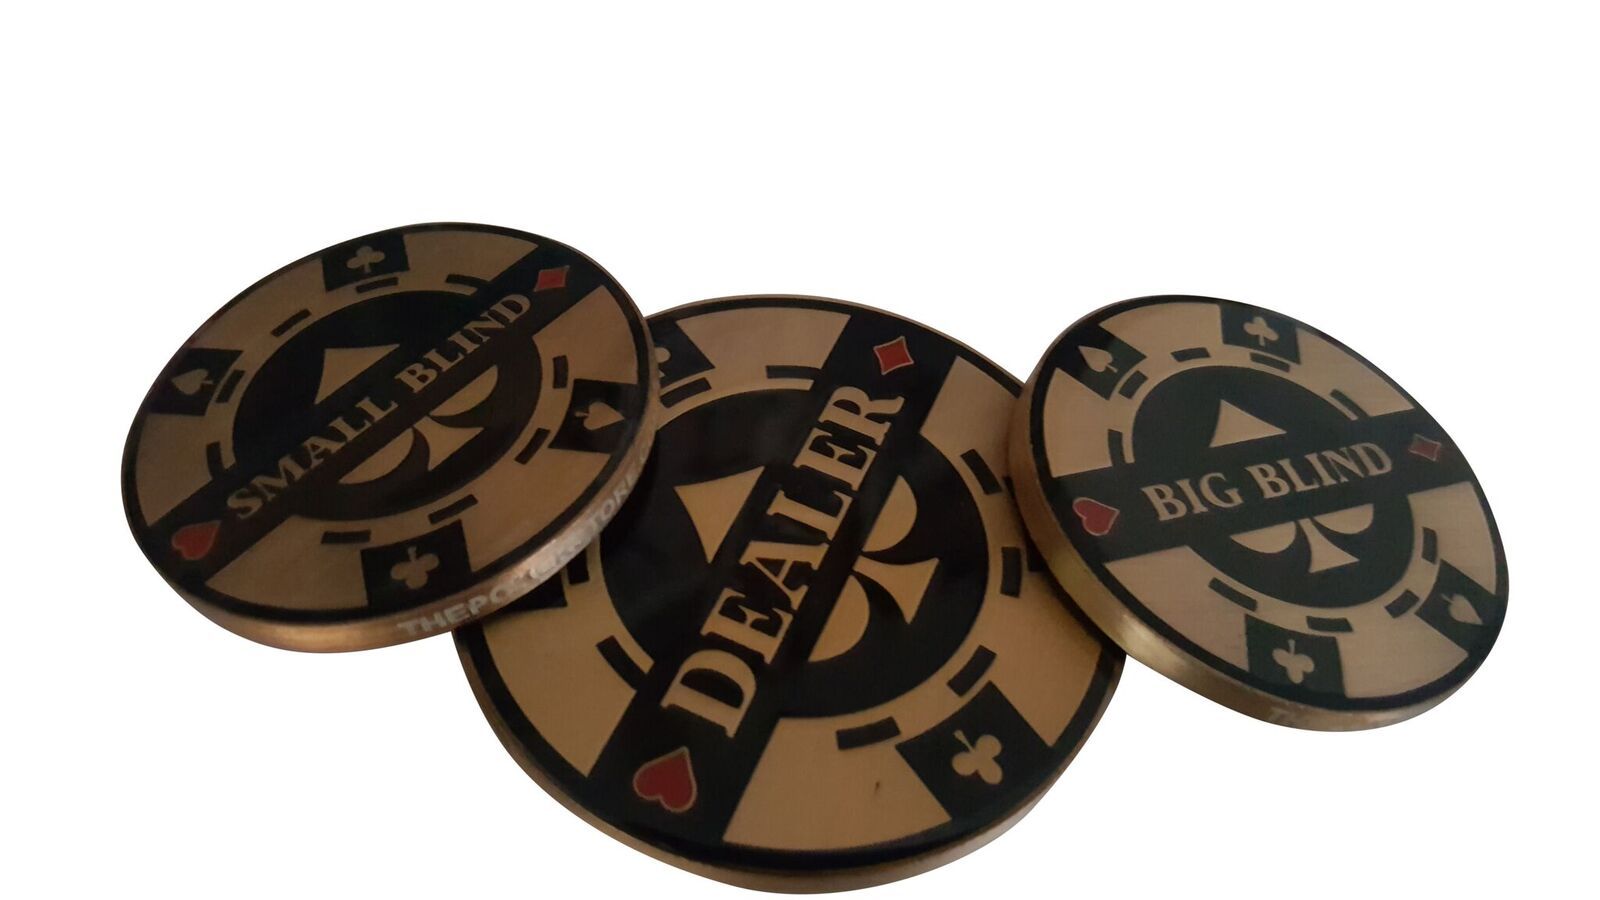 Double Sided Dealer, Blind, and Big Blind Poker Buttons